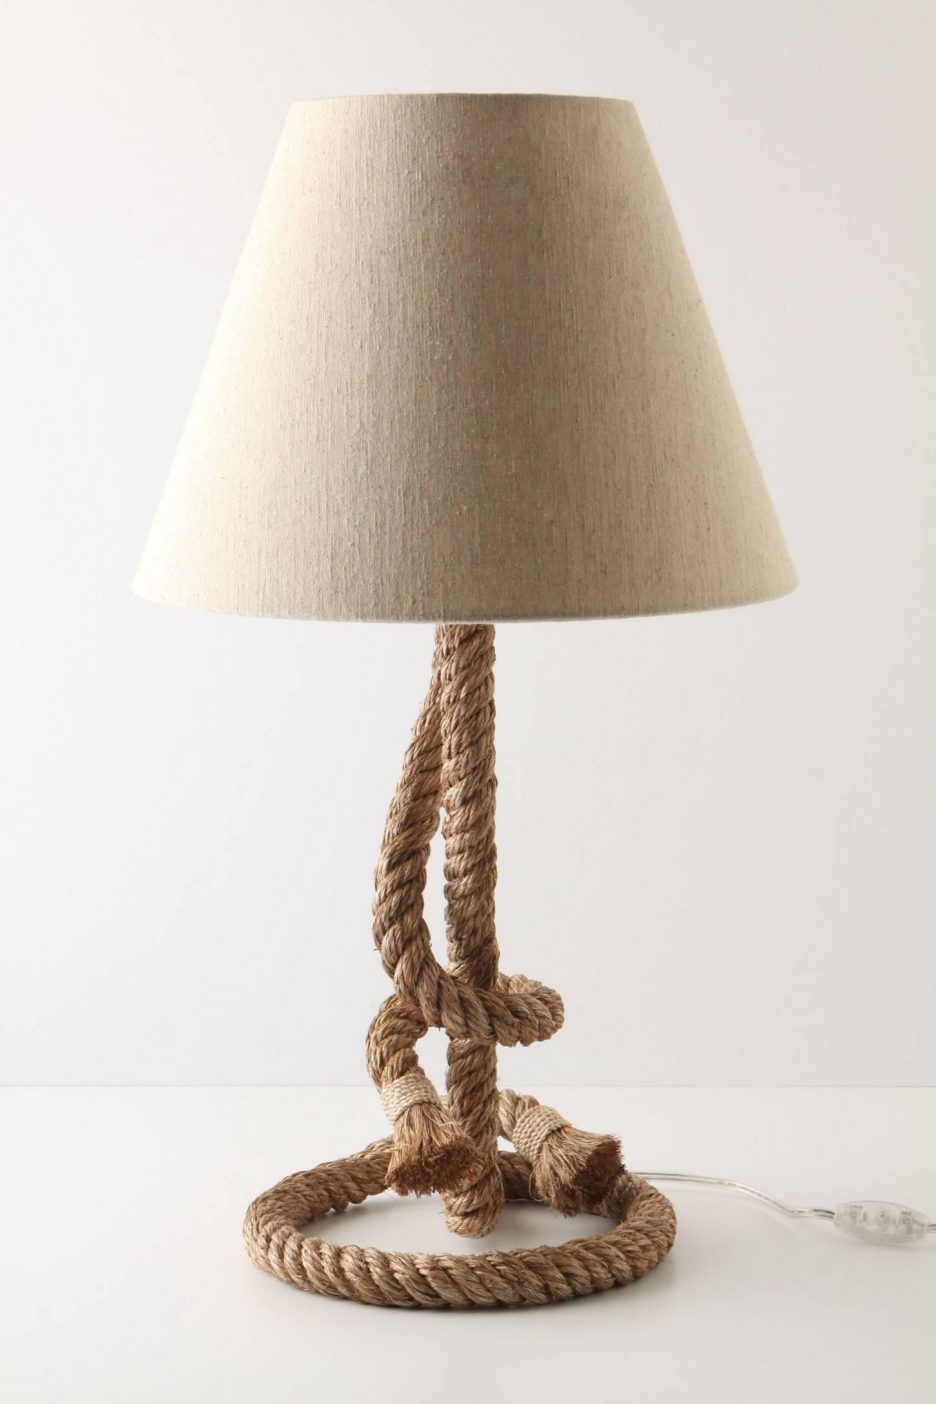 nautical pendant light shades lantern table lamp beach themed outdoor lamps accent battery operated ikea west elm fixtures antique kidney sofa ping popular istikbal funky bedside